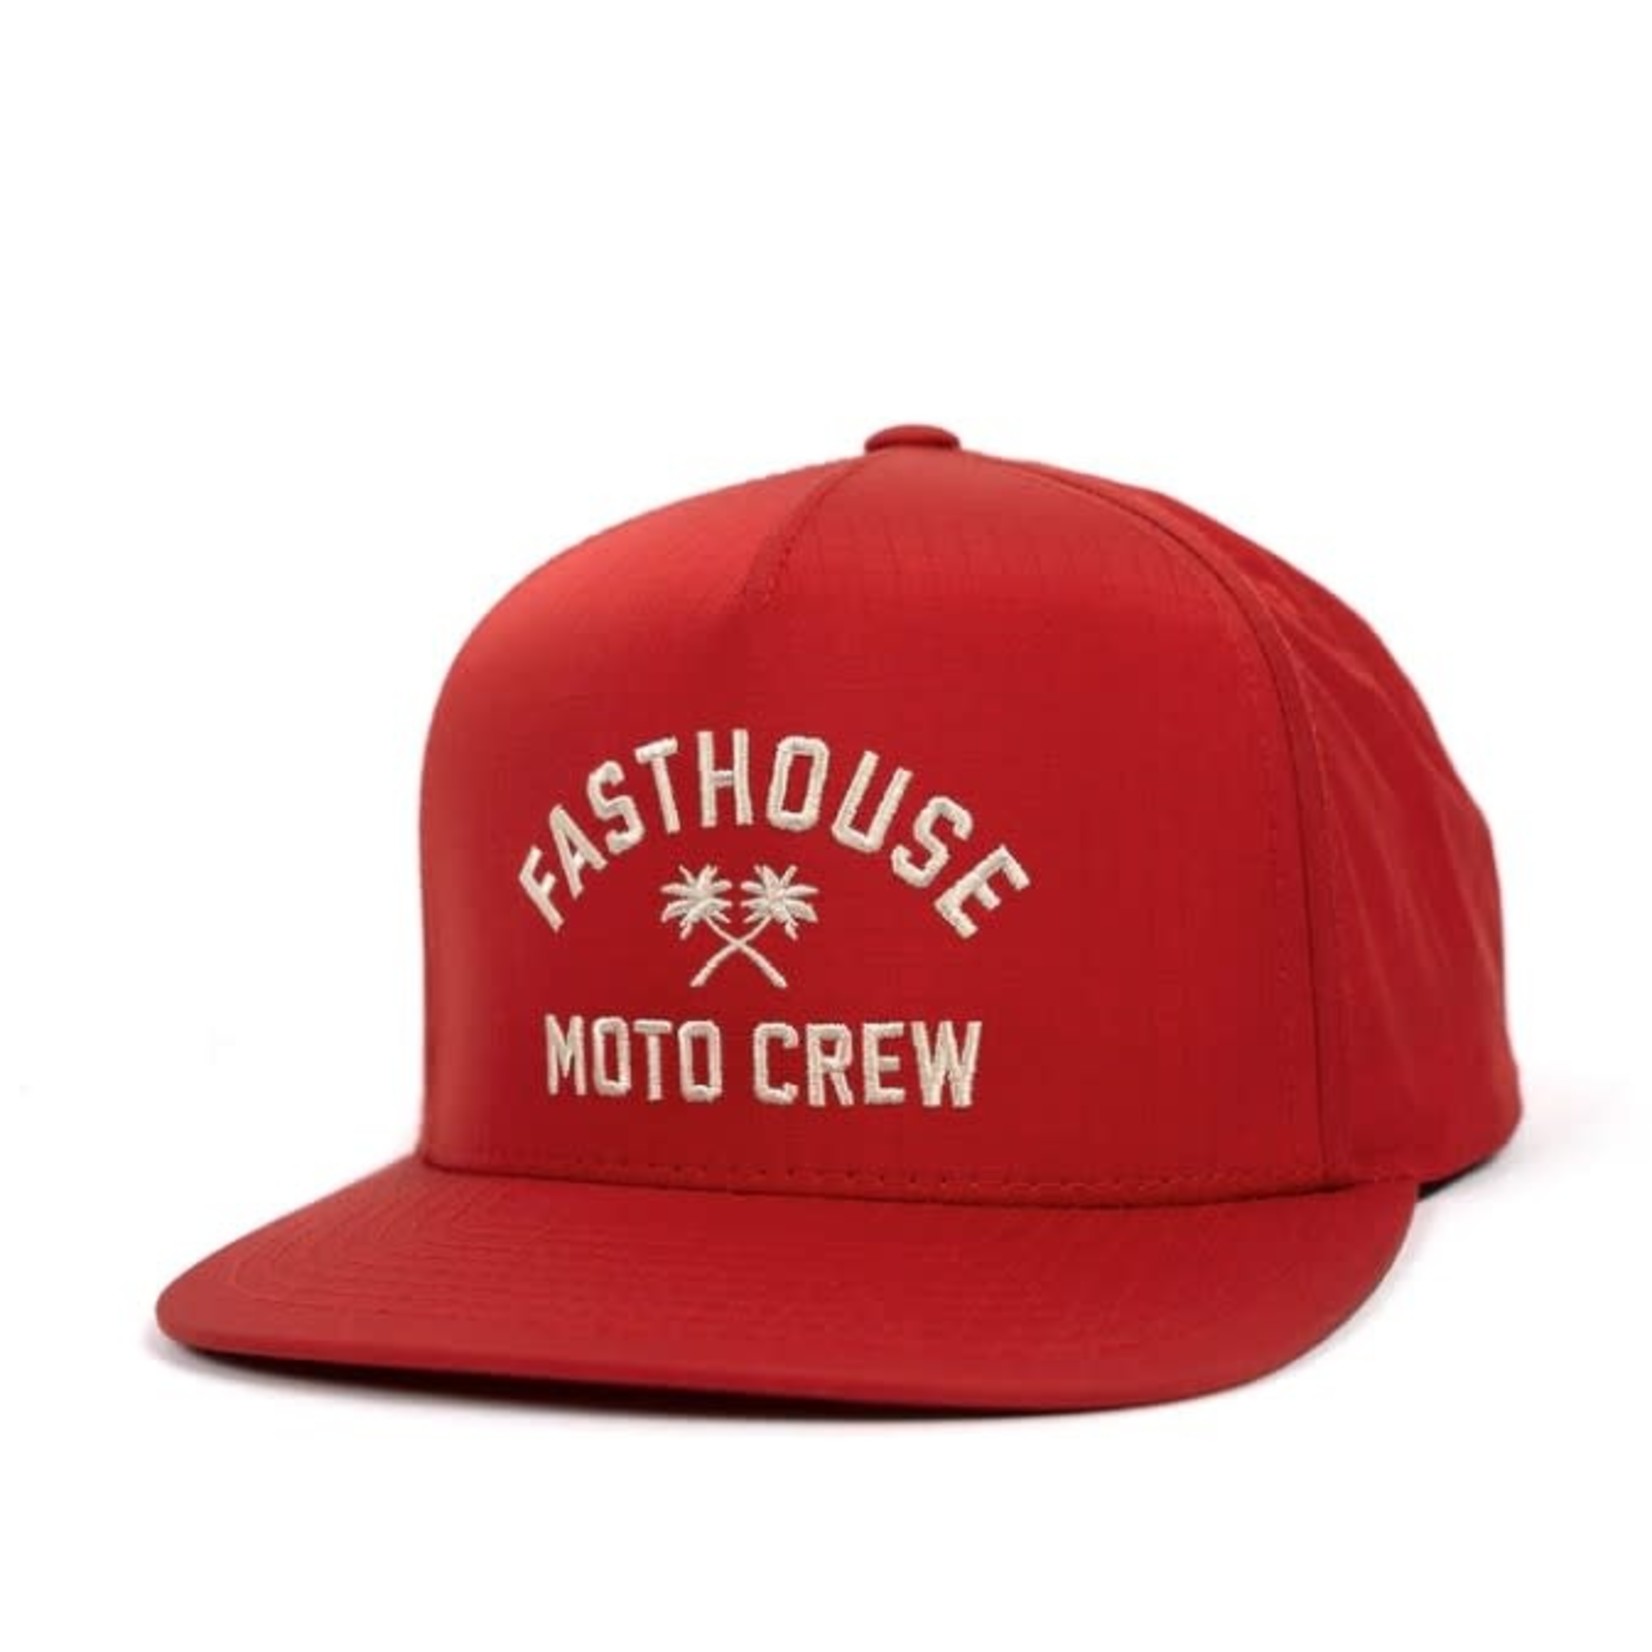 FASTHOUSE Slater Hat - Youth - OS